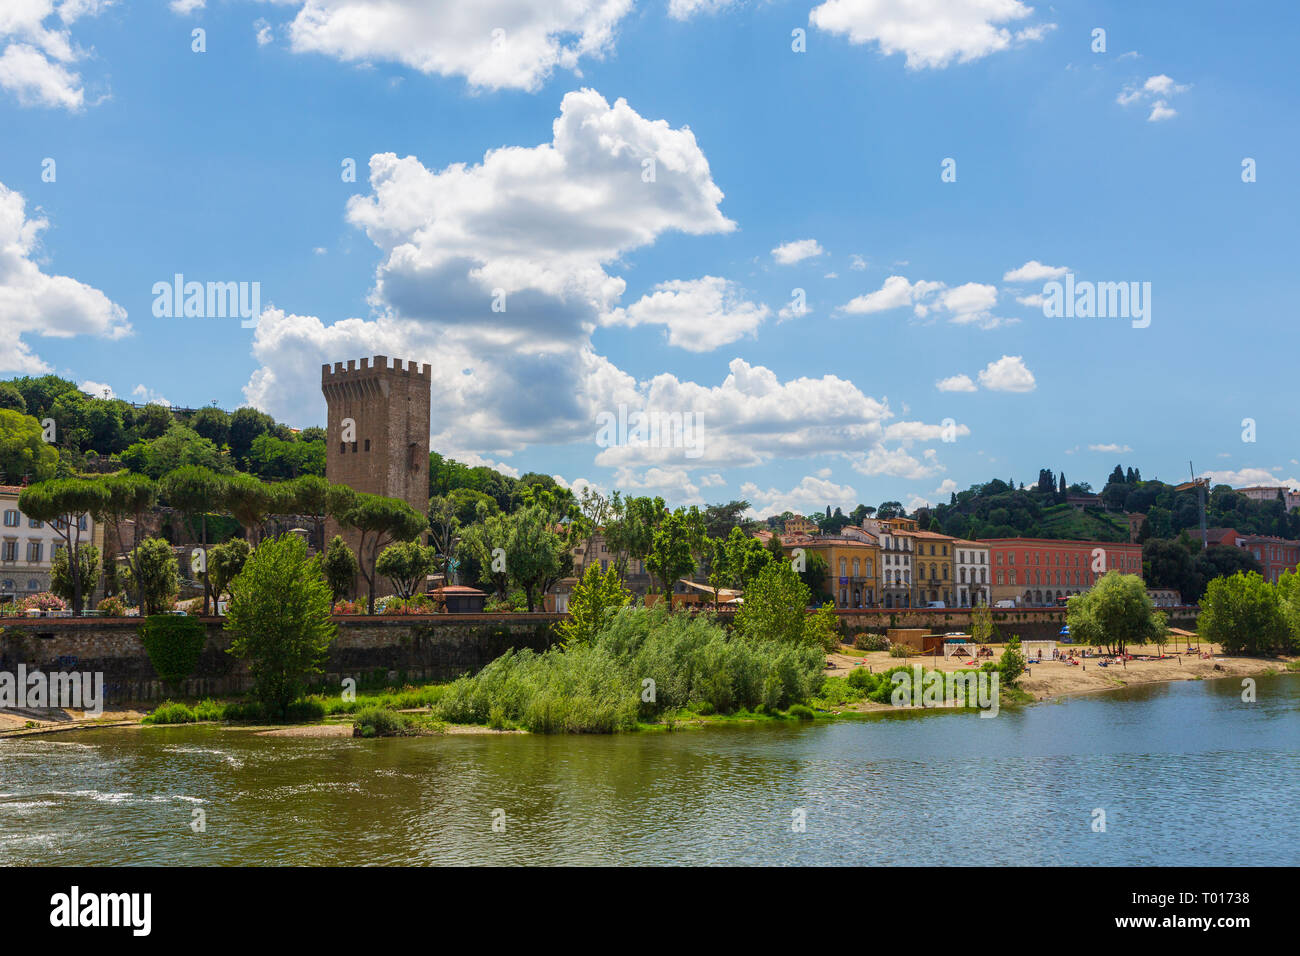 The Arno River in the Tuscany region of Italy, flowing through the heart of Florence, Italy. Stock Photo